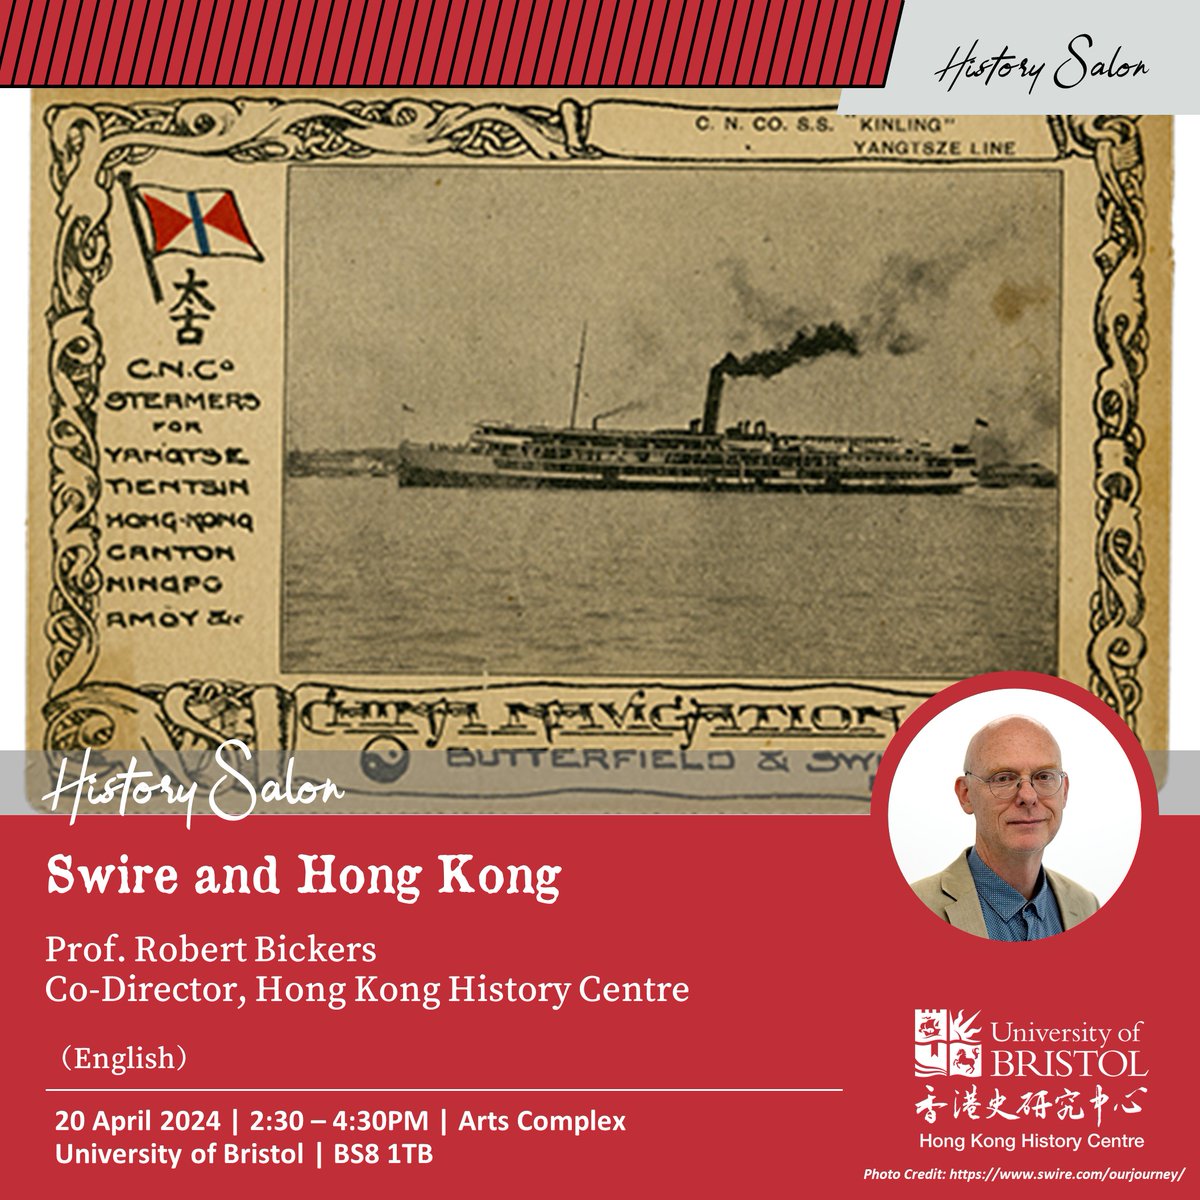 Our fourth History Salon will be on 20 April 2024, with Prof. Robert Bickers sharing on 'Swire and Hong Kong'. This will be conducted in English. Please register: tktp.as/EUNIFW